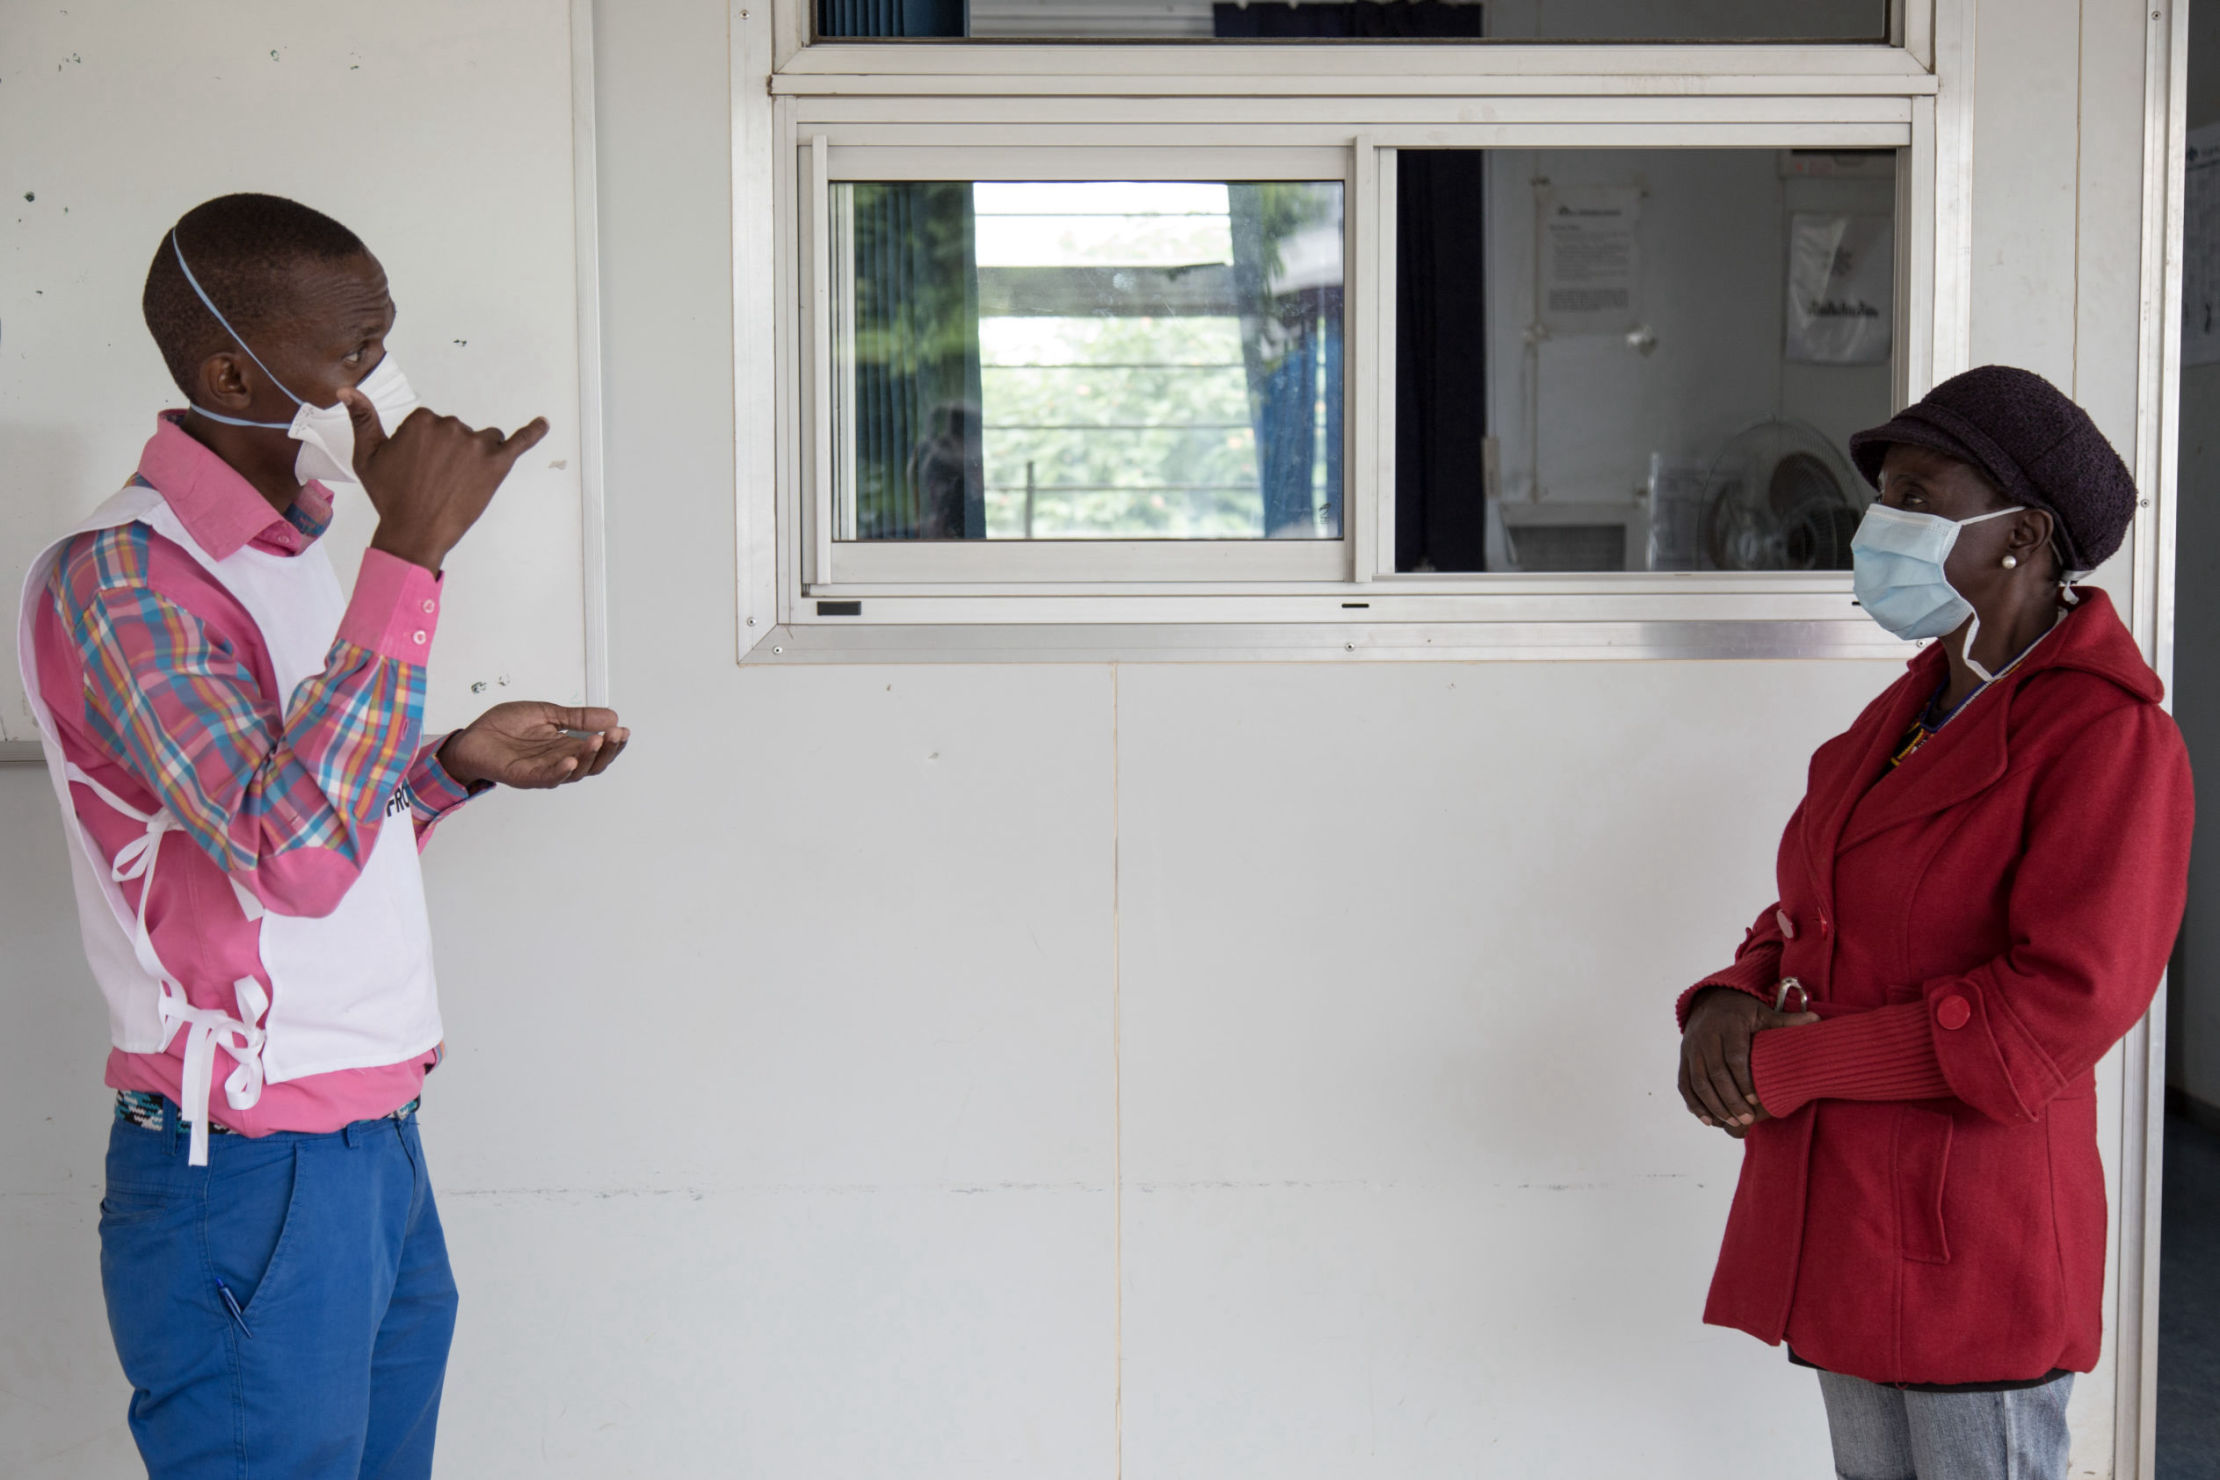 Celumusa Hlatswako (left), MSF mobile counselor, is talking in sign language with Thulie (right), non-deaf MDR- TB patient, during a sign language training. Thulie is cured but she wanted to learn sign language to help other patients and other deaf people in her community. Matsapha Clinic, Manzini Region, Swaziland (now Eswatini). Photo by Alexis Huguet.